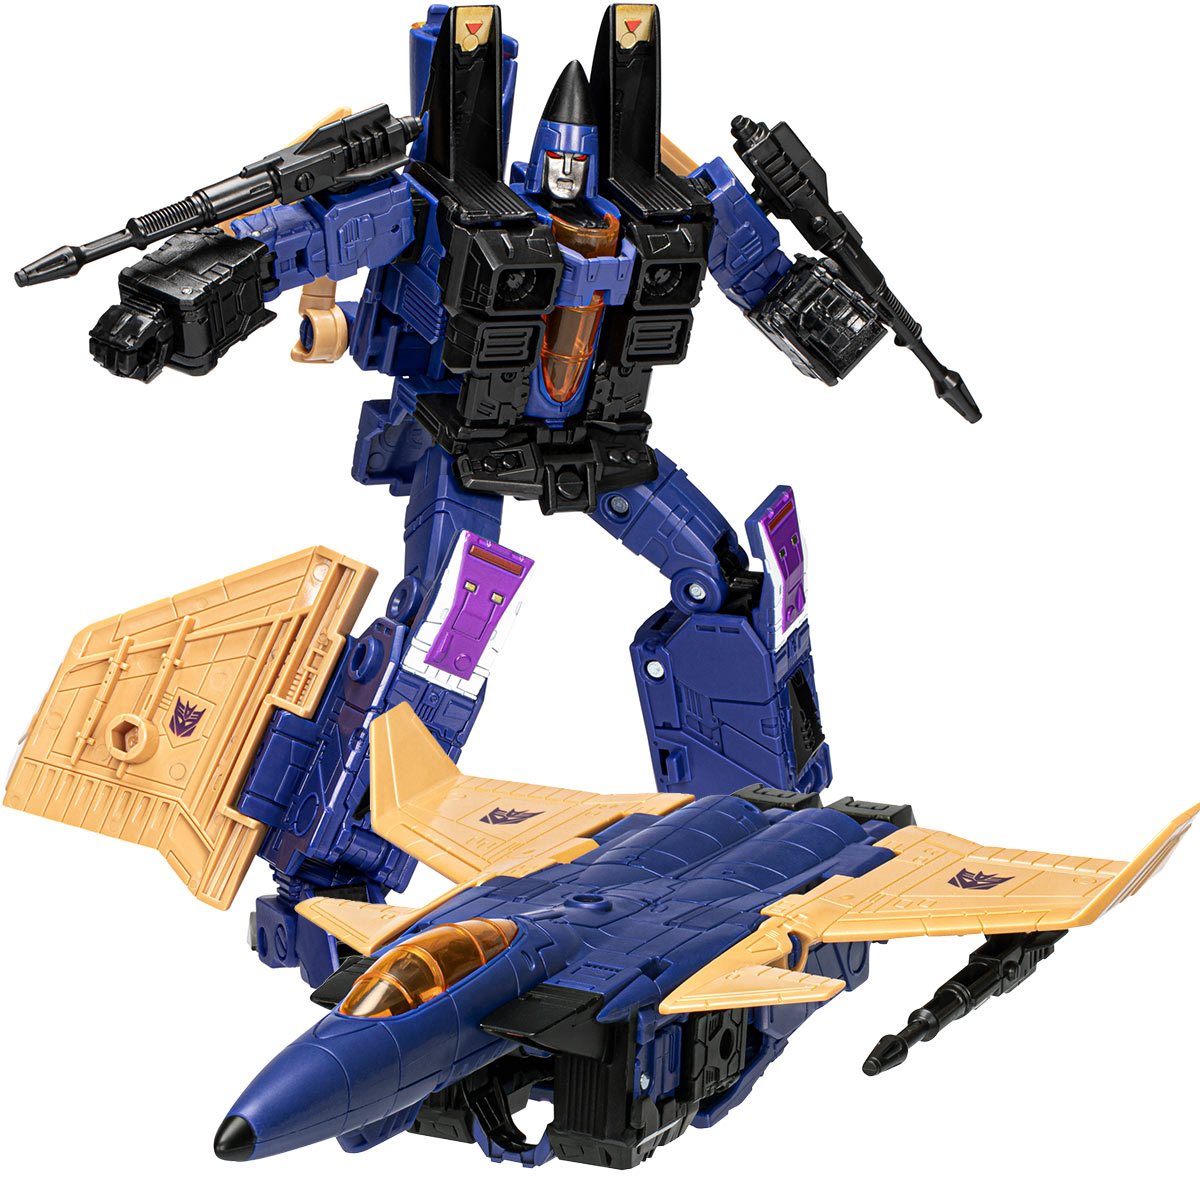 Transformers Generations Legacy Evolution Voyager Dirge Action Figure Toy - Heretoserveyou